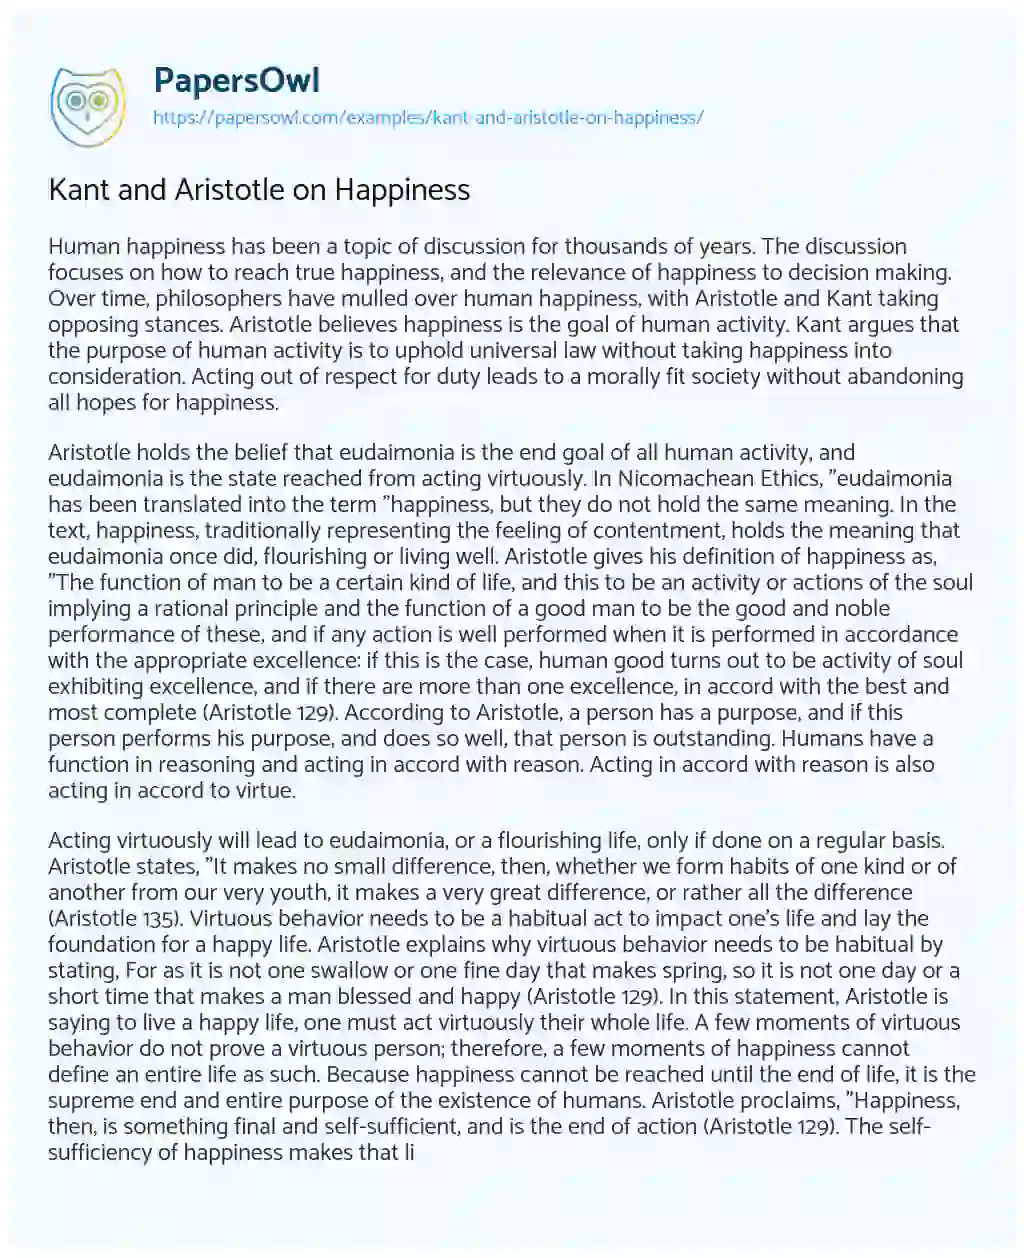 Essay on Kant and Aristotle on Happiness